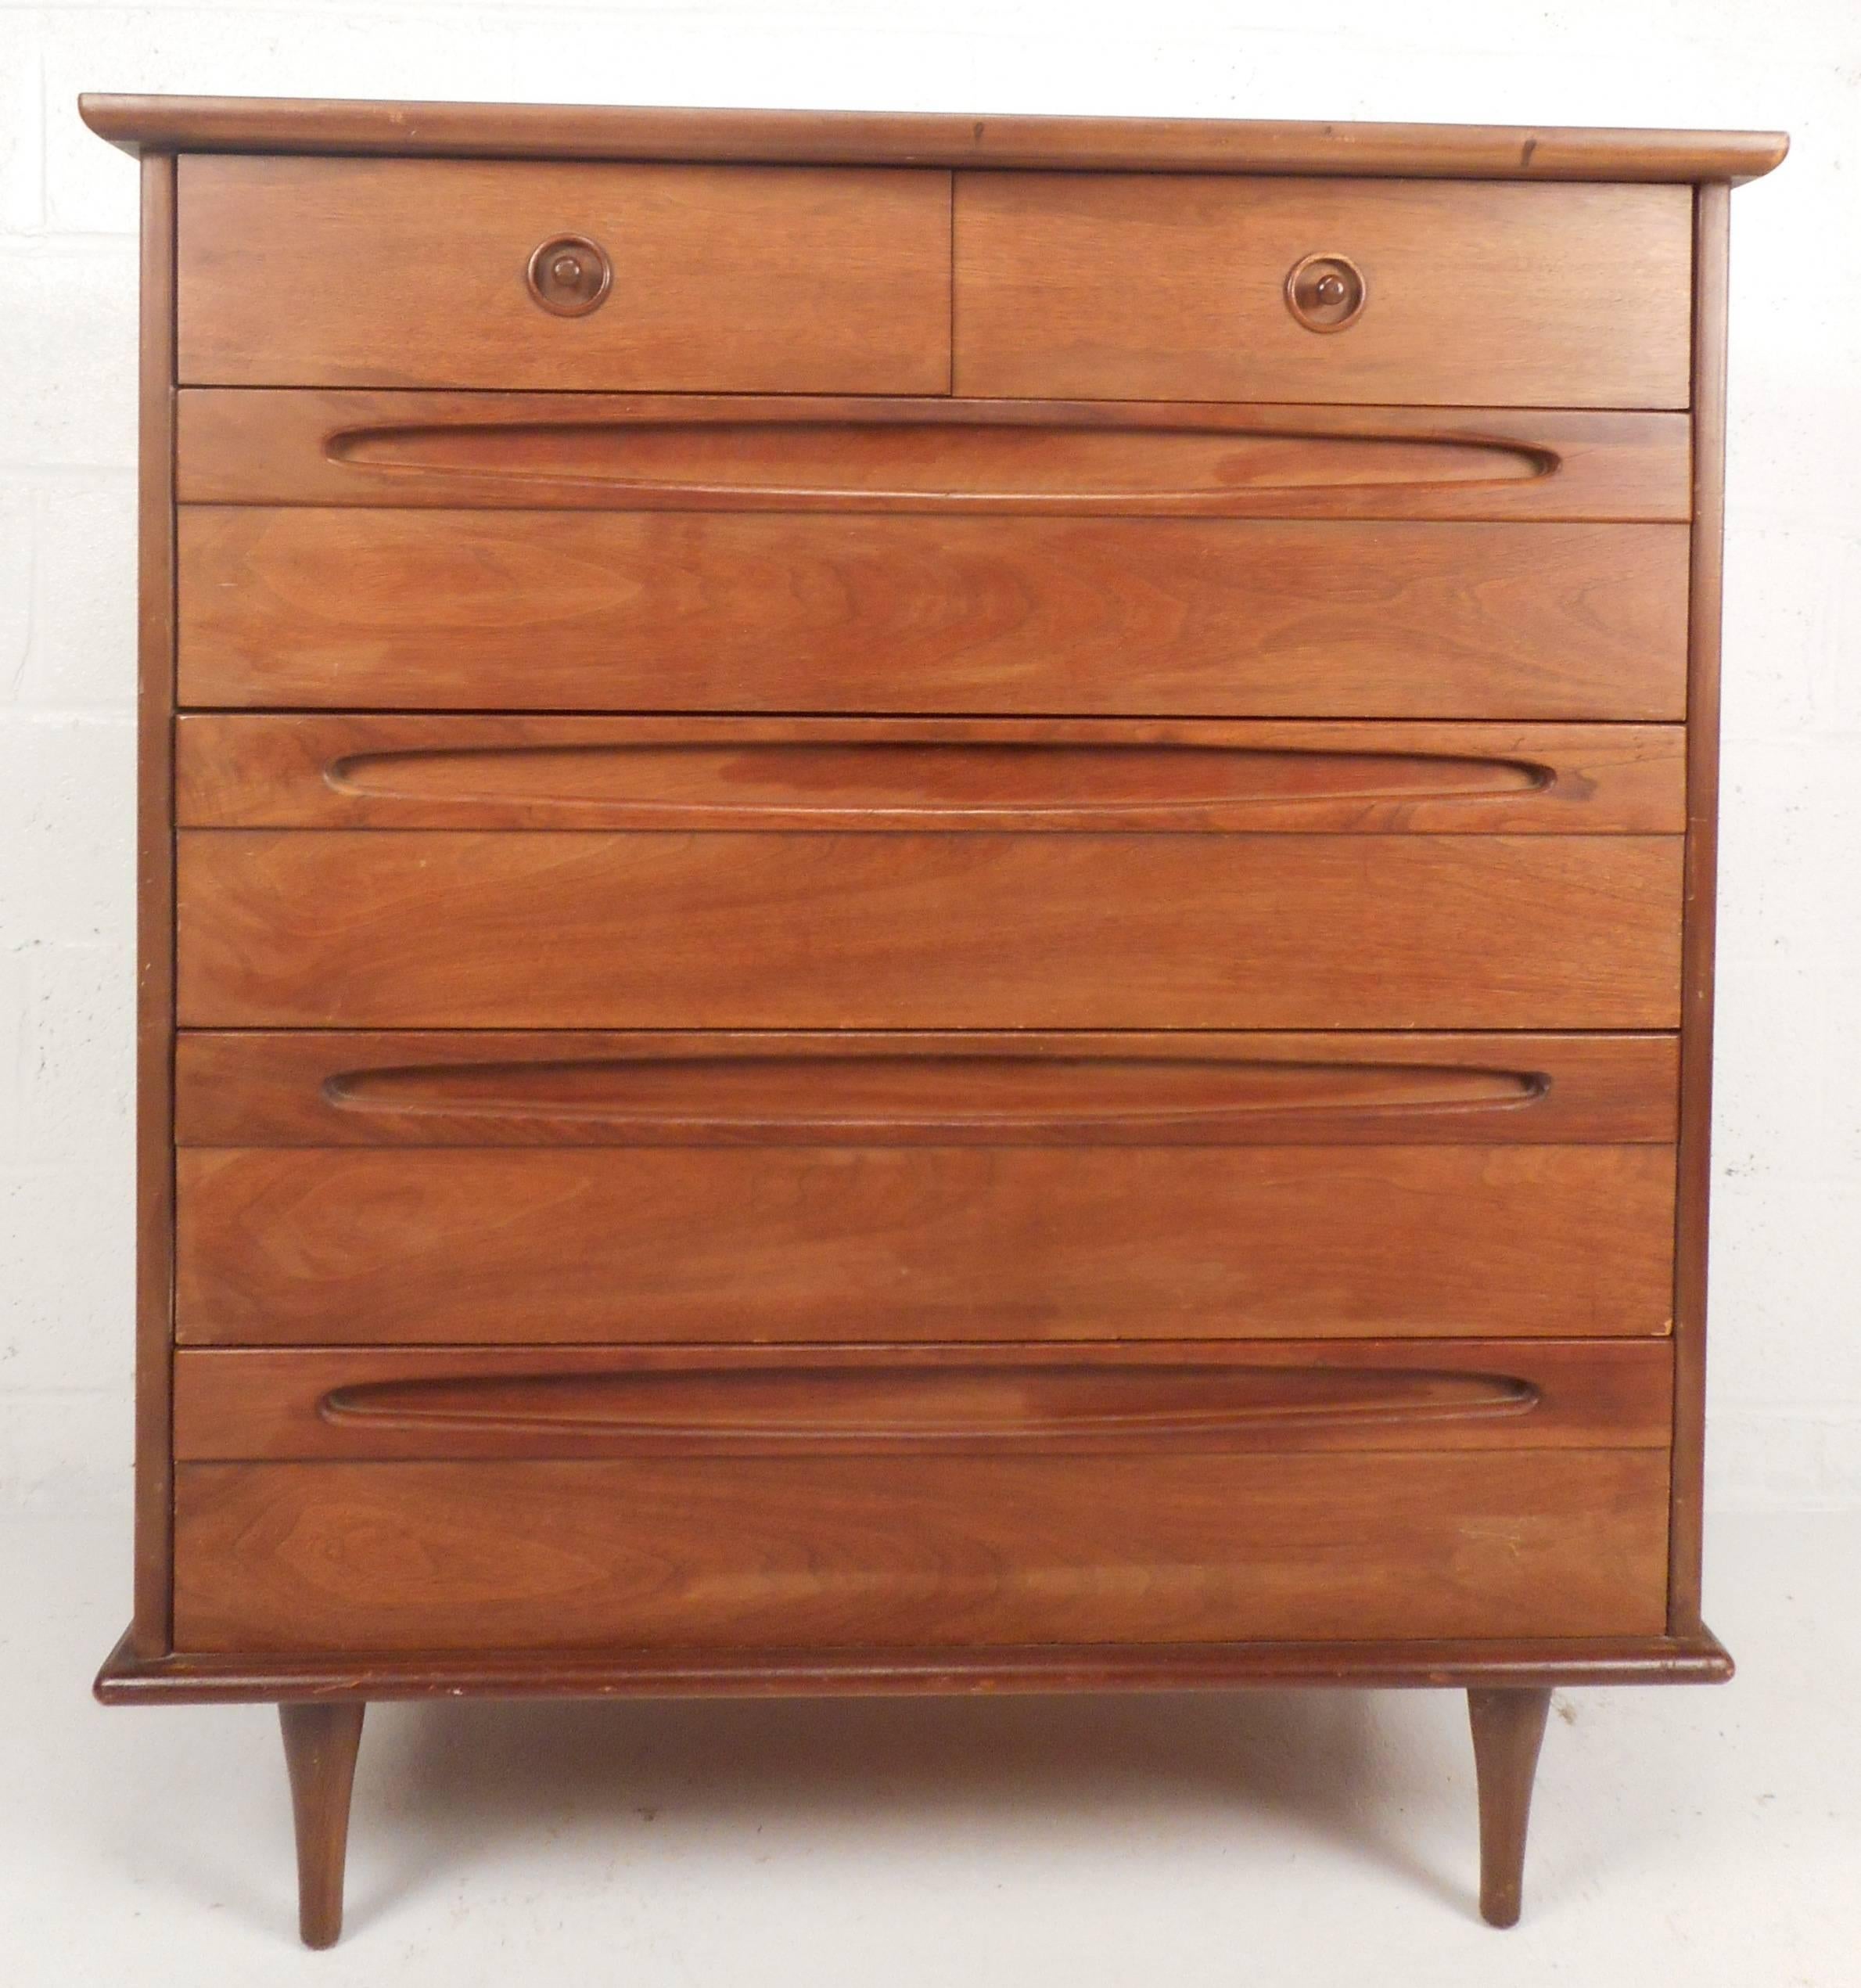 Stunning Mid-Century bedroom set includes a nine-drawer dresser and six-drawer highboy. Gorgeous walnut wood grain, tapered legs and dove tail joints add to the allure of this piece. These wonderful dressers feature oblong recessed pulls on both